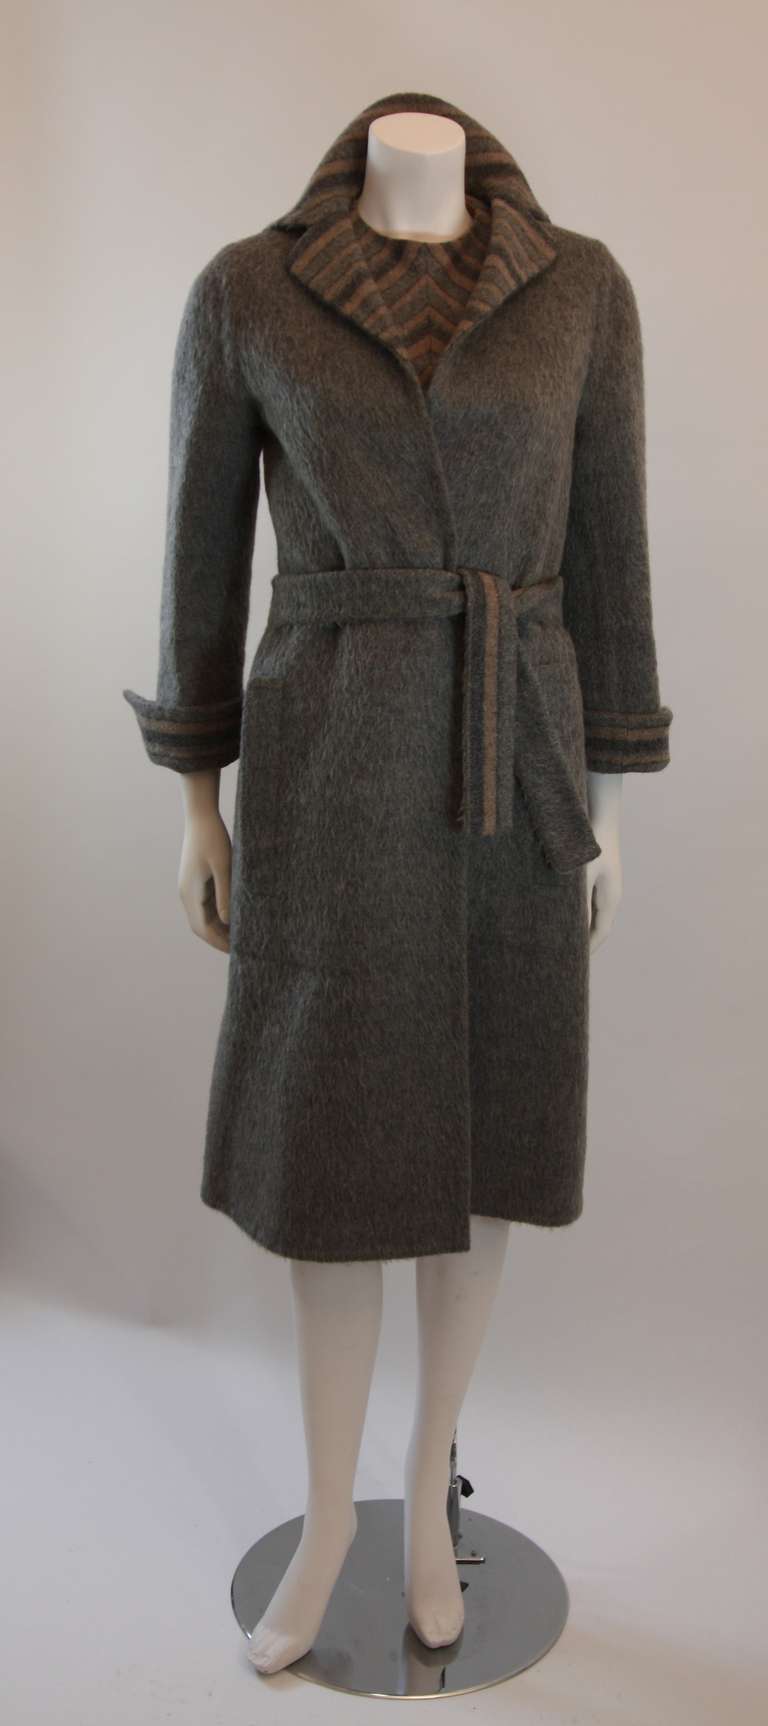 This is a wonderful Pauline Trigere design. A dreamy three piece set with a completely reversible coat. The dress is fashioned with perfect symmetry, it features two front pockets, and a zipper closure. The set is also complimented by a beautiful